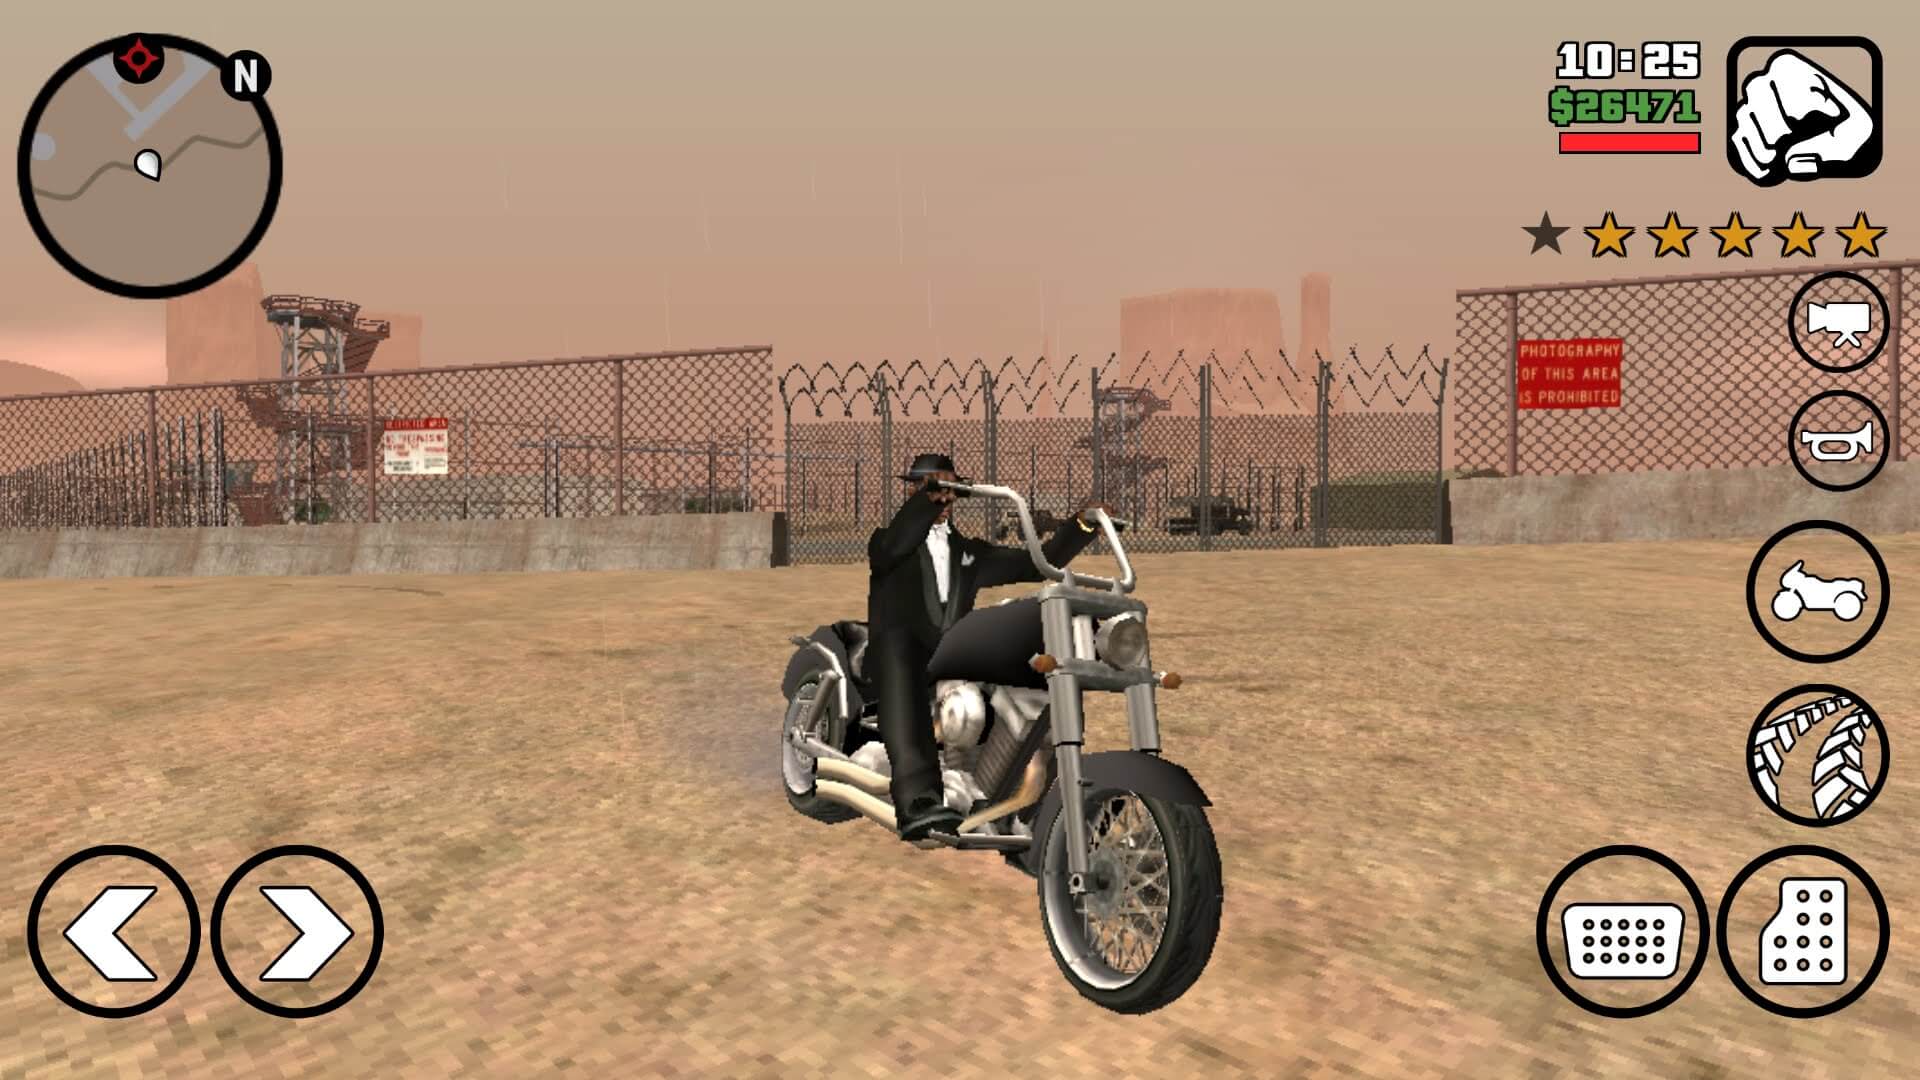 Gta San Andreas Free Download Game For Pc Full Download